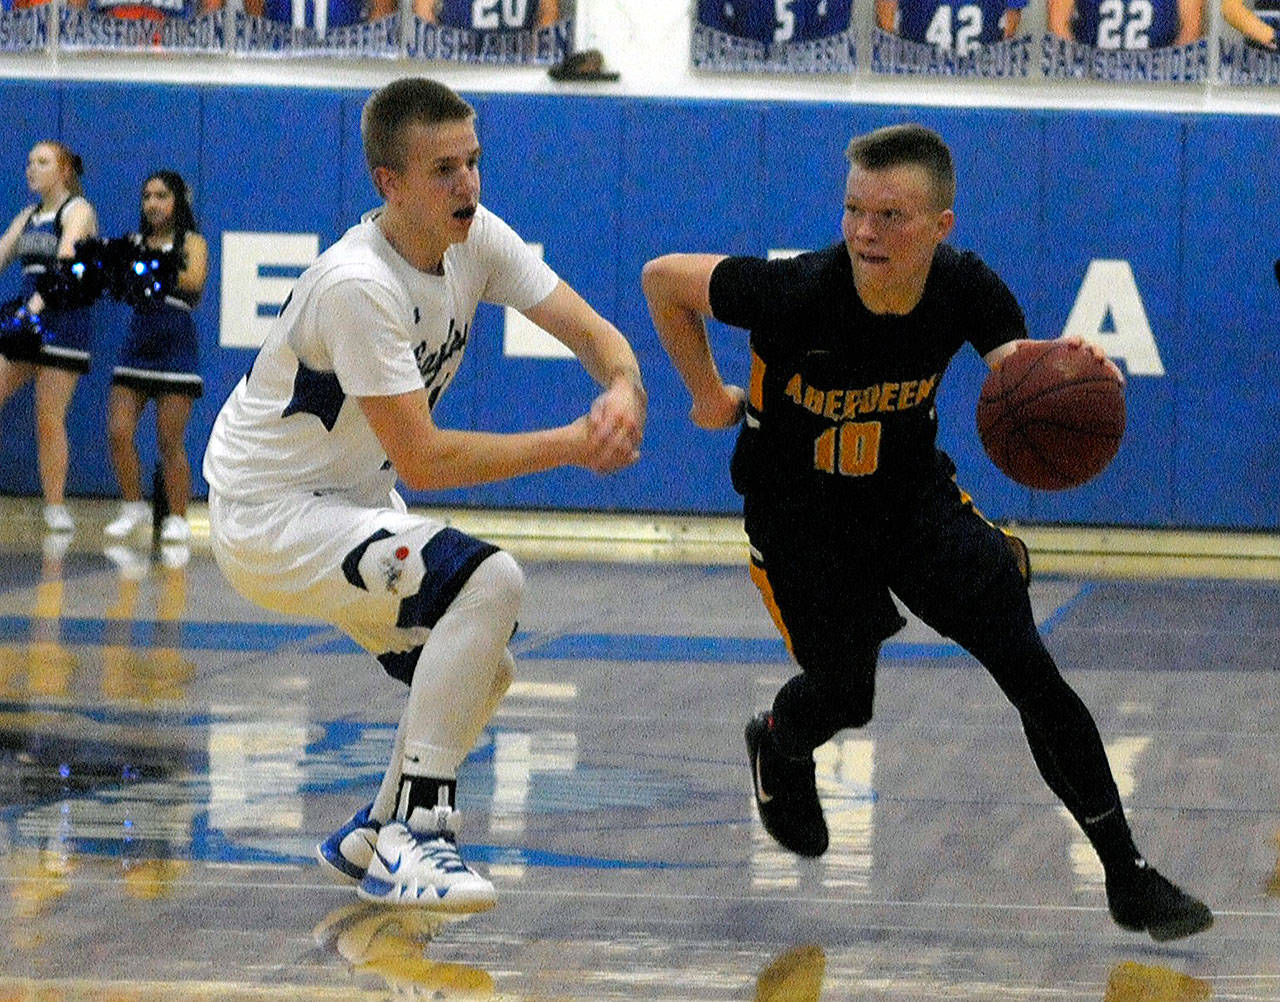 Aberdeen’s Ben Dublanko, right, dribbles past Elma’s Carter Jacobson near mid court in the third quarter on Tuesday. Dublanko led the Bobcats with 23 points. (Hasani Grayson | Grays Harbor News Group)